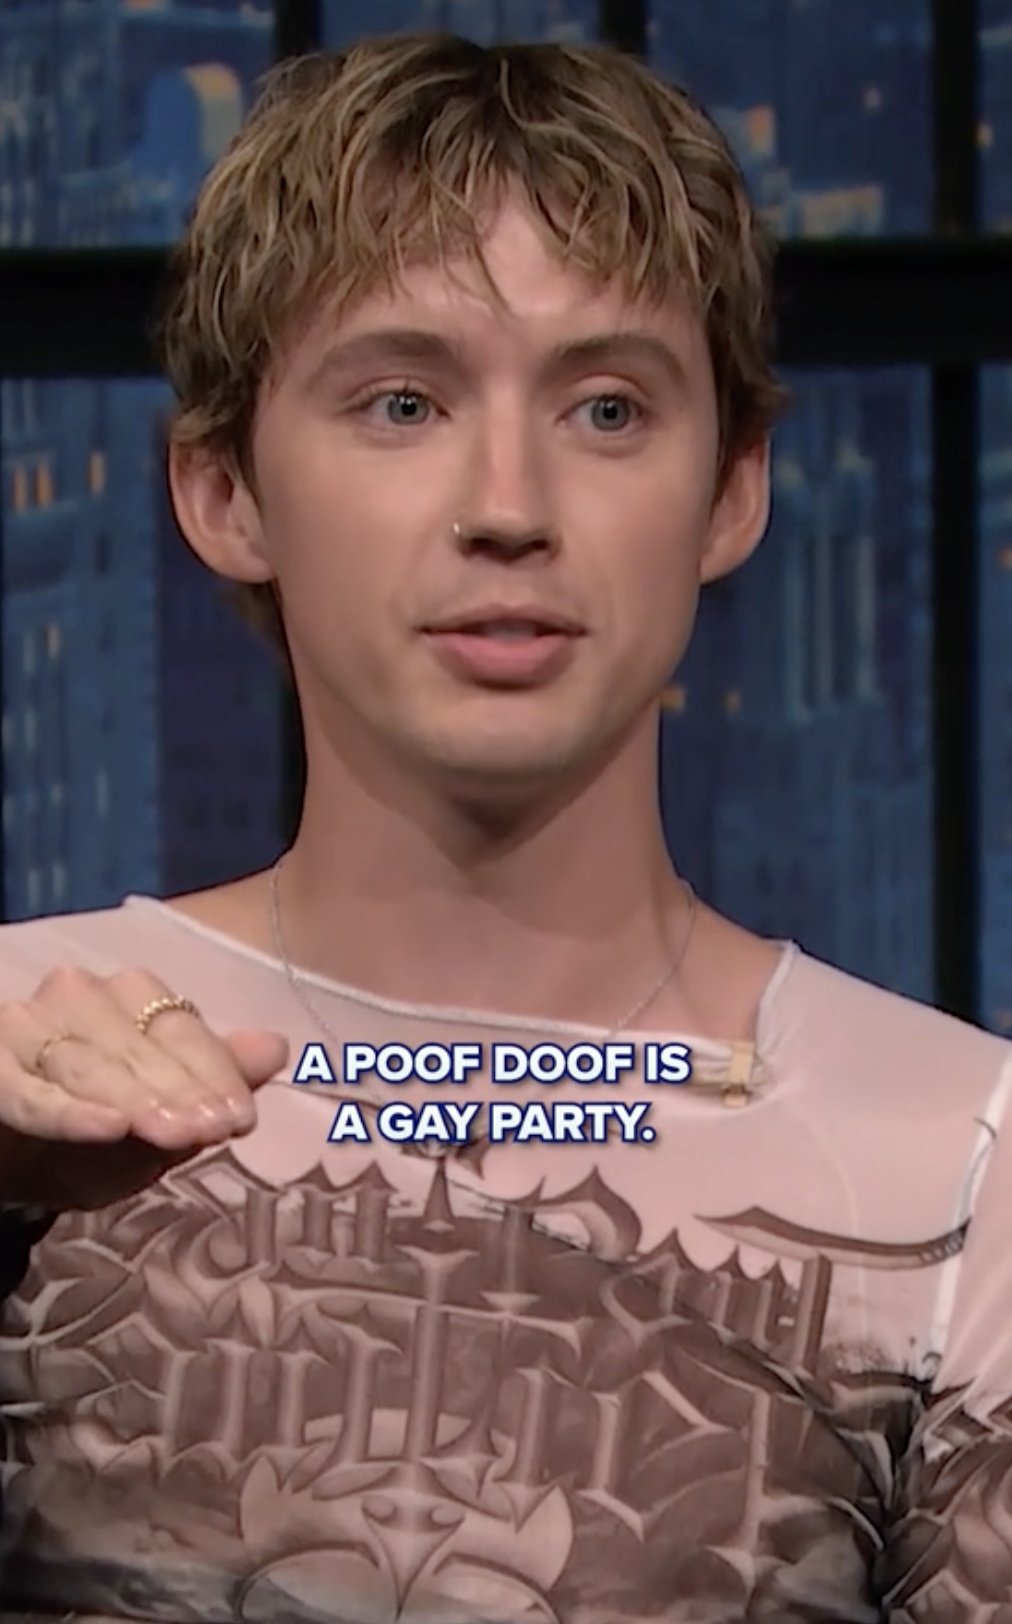 Person on a talk show wearing a graphic shirt with text overlay: &quot;A POOF DOOF IS A GAY PARTY.&quot;